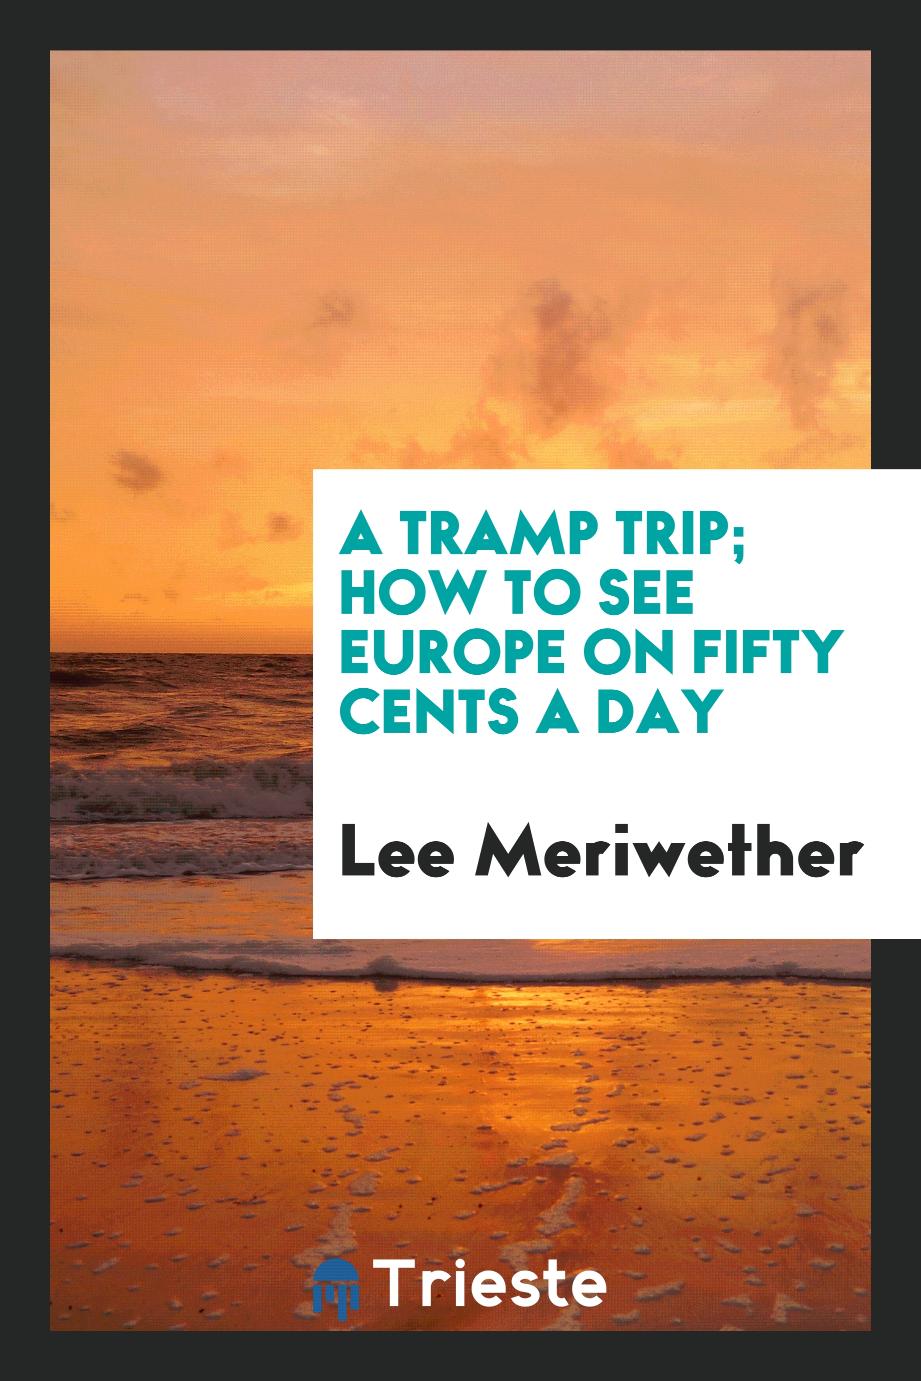 A tramp trip; how to see Europe on fifty cents a day